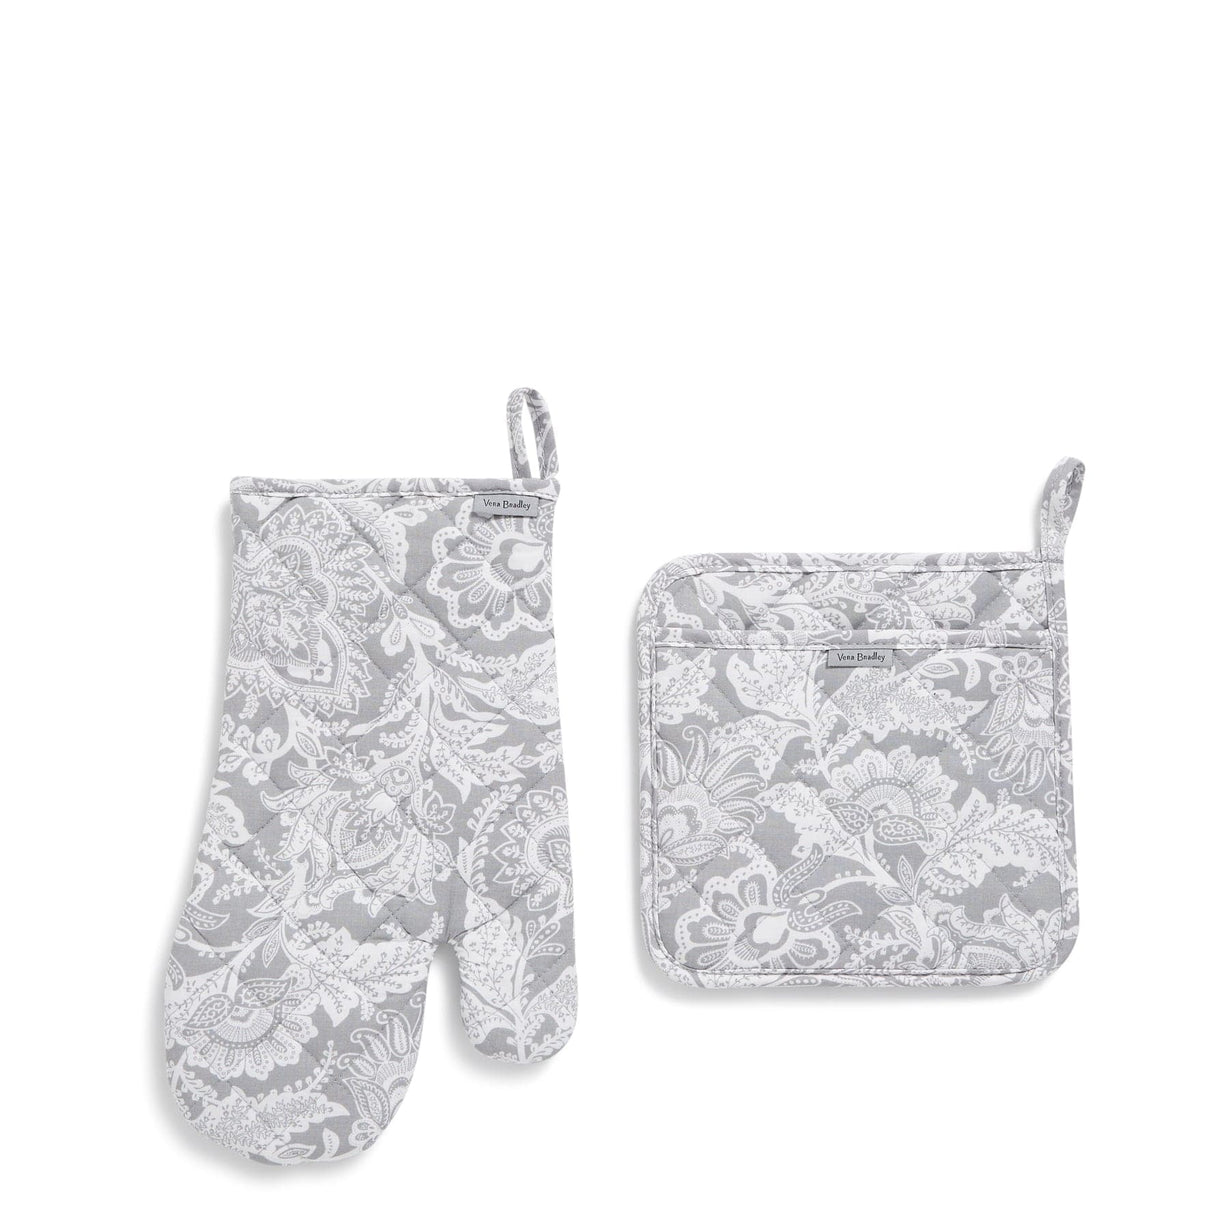 Cosy House Collection Oven Mitt & Pot Holder Set